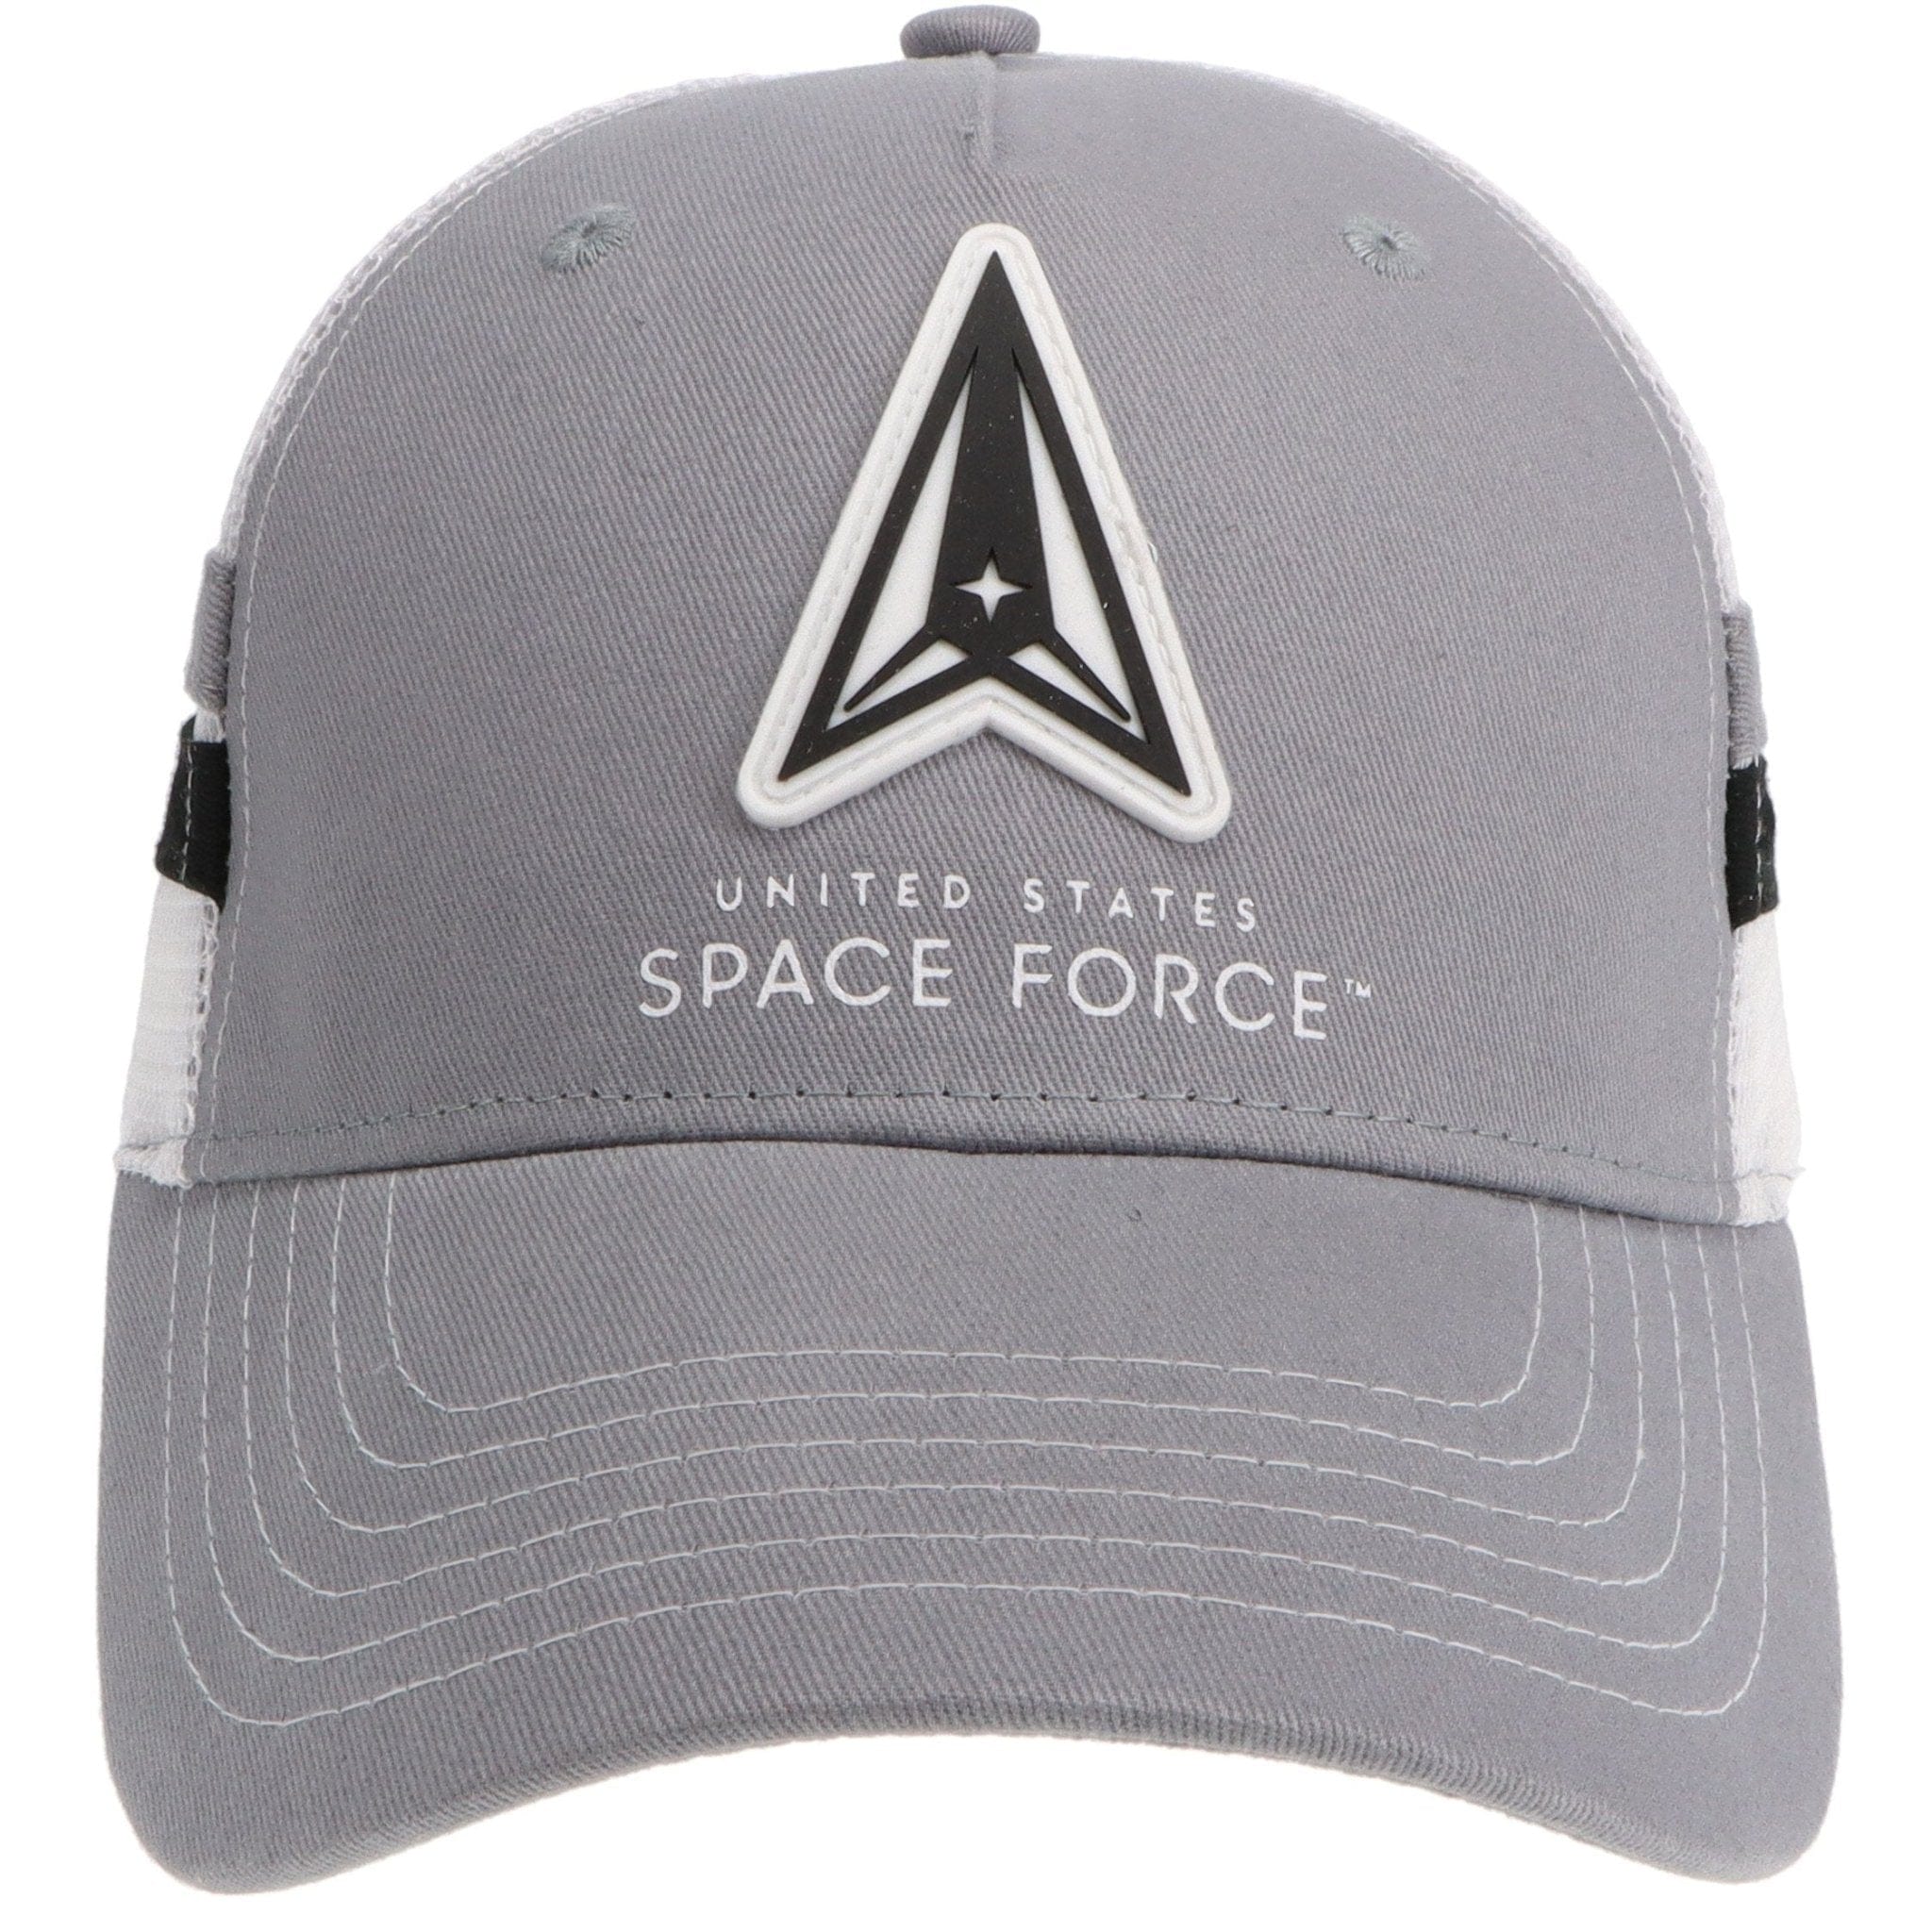 U.S. Space Force Officially Licensed Aeroplane Apparel Co. Men's Ball Cap - PilotMall.com